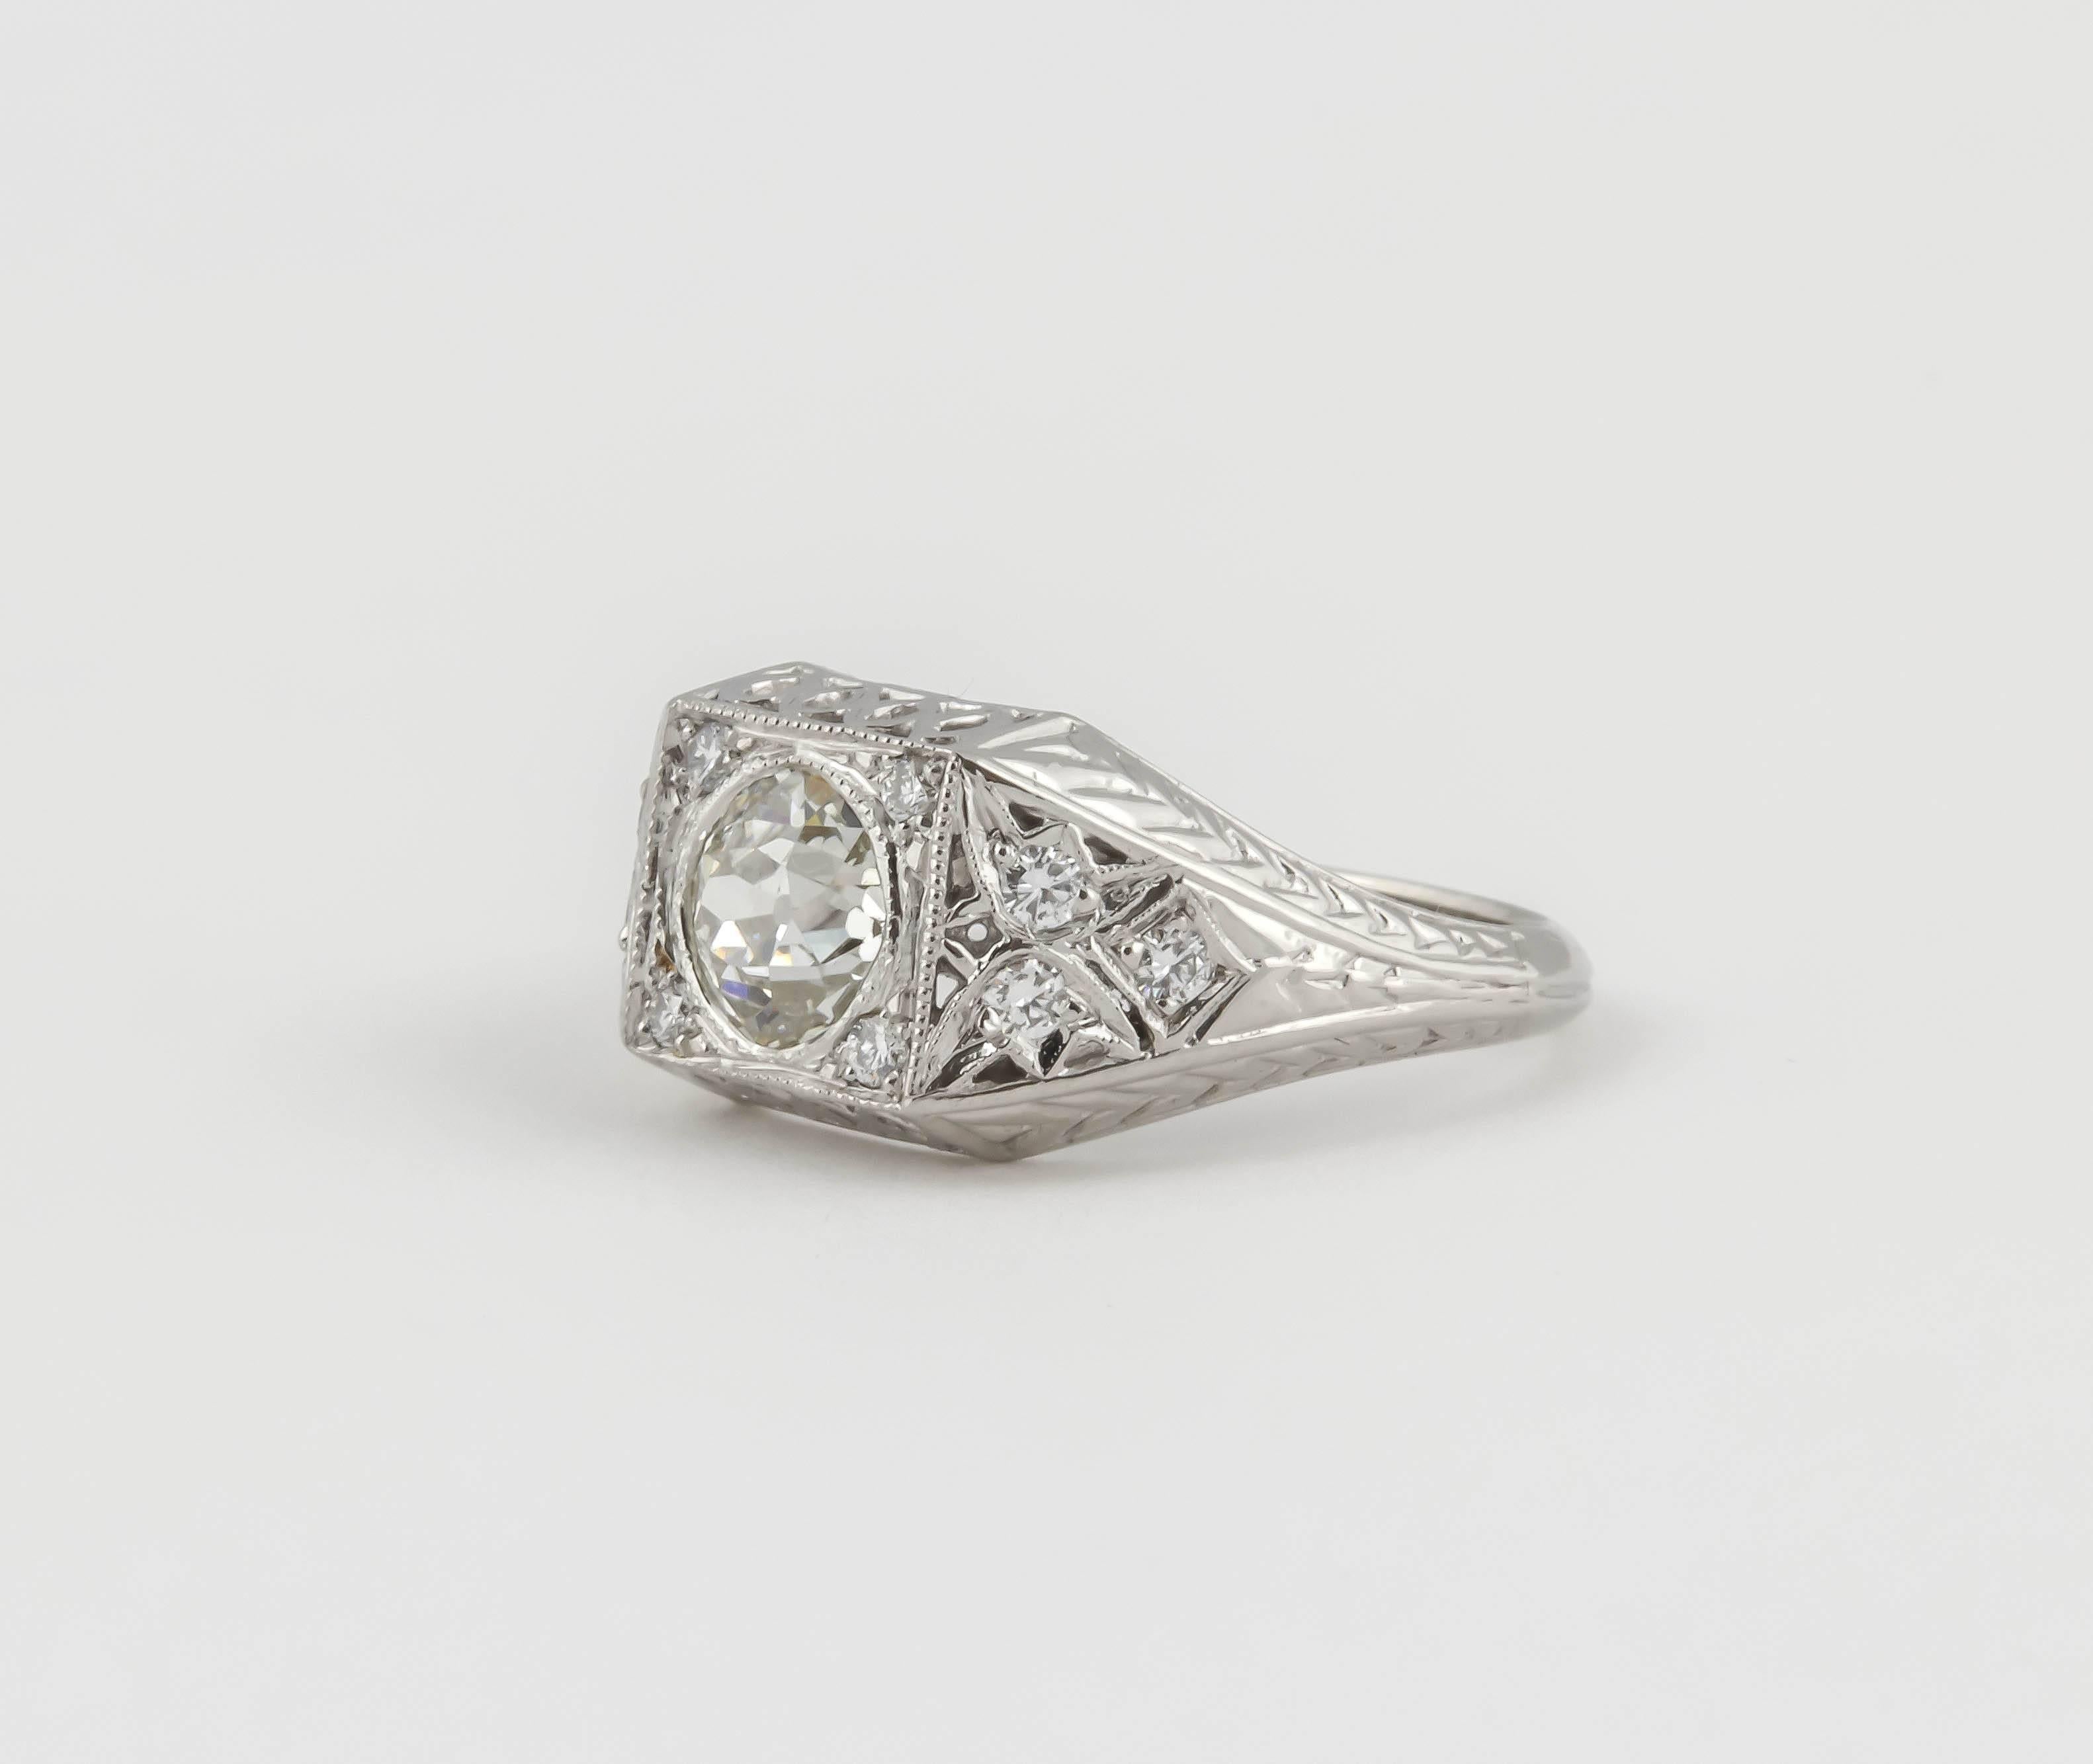 This beautiful ring sports an .89 ct old mine diamond. There is no cert but the diamond is white, no tinge of yellow. It is set in an antique style platinum ring with a diamond pave set on each corner of the top and 3 on each side of the ring.
The